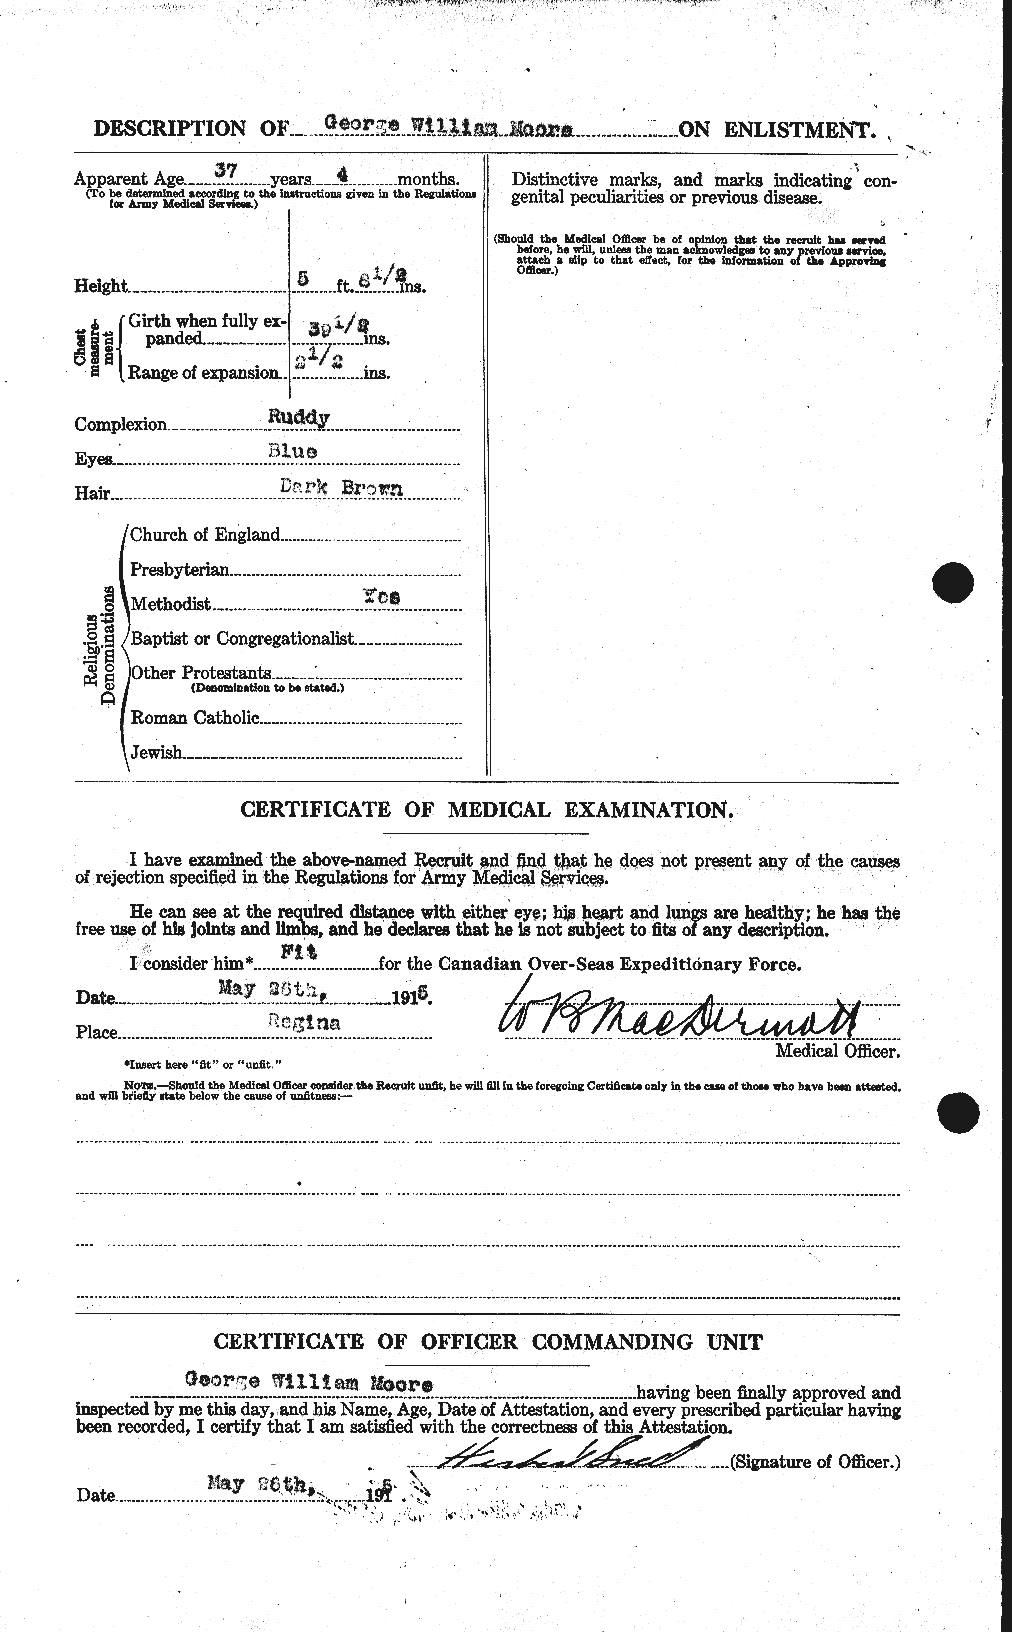 Personnel Records of the First World War - CEF 502029b